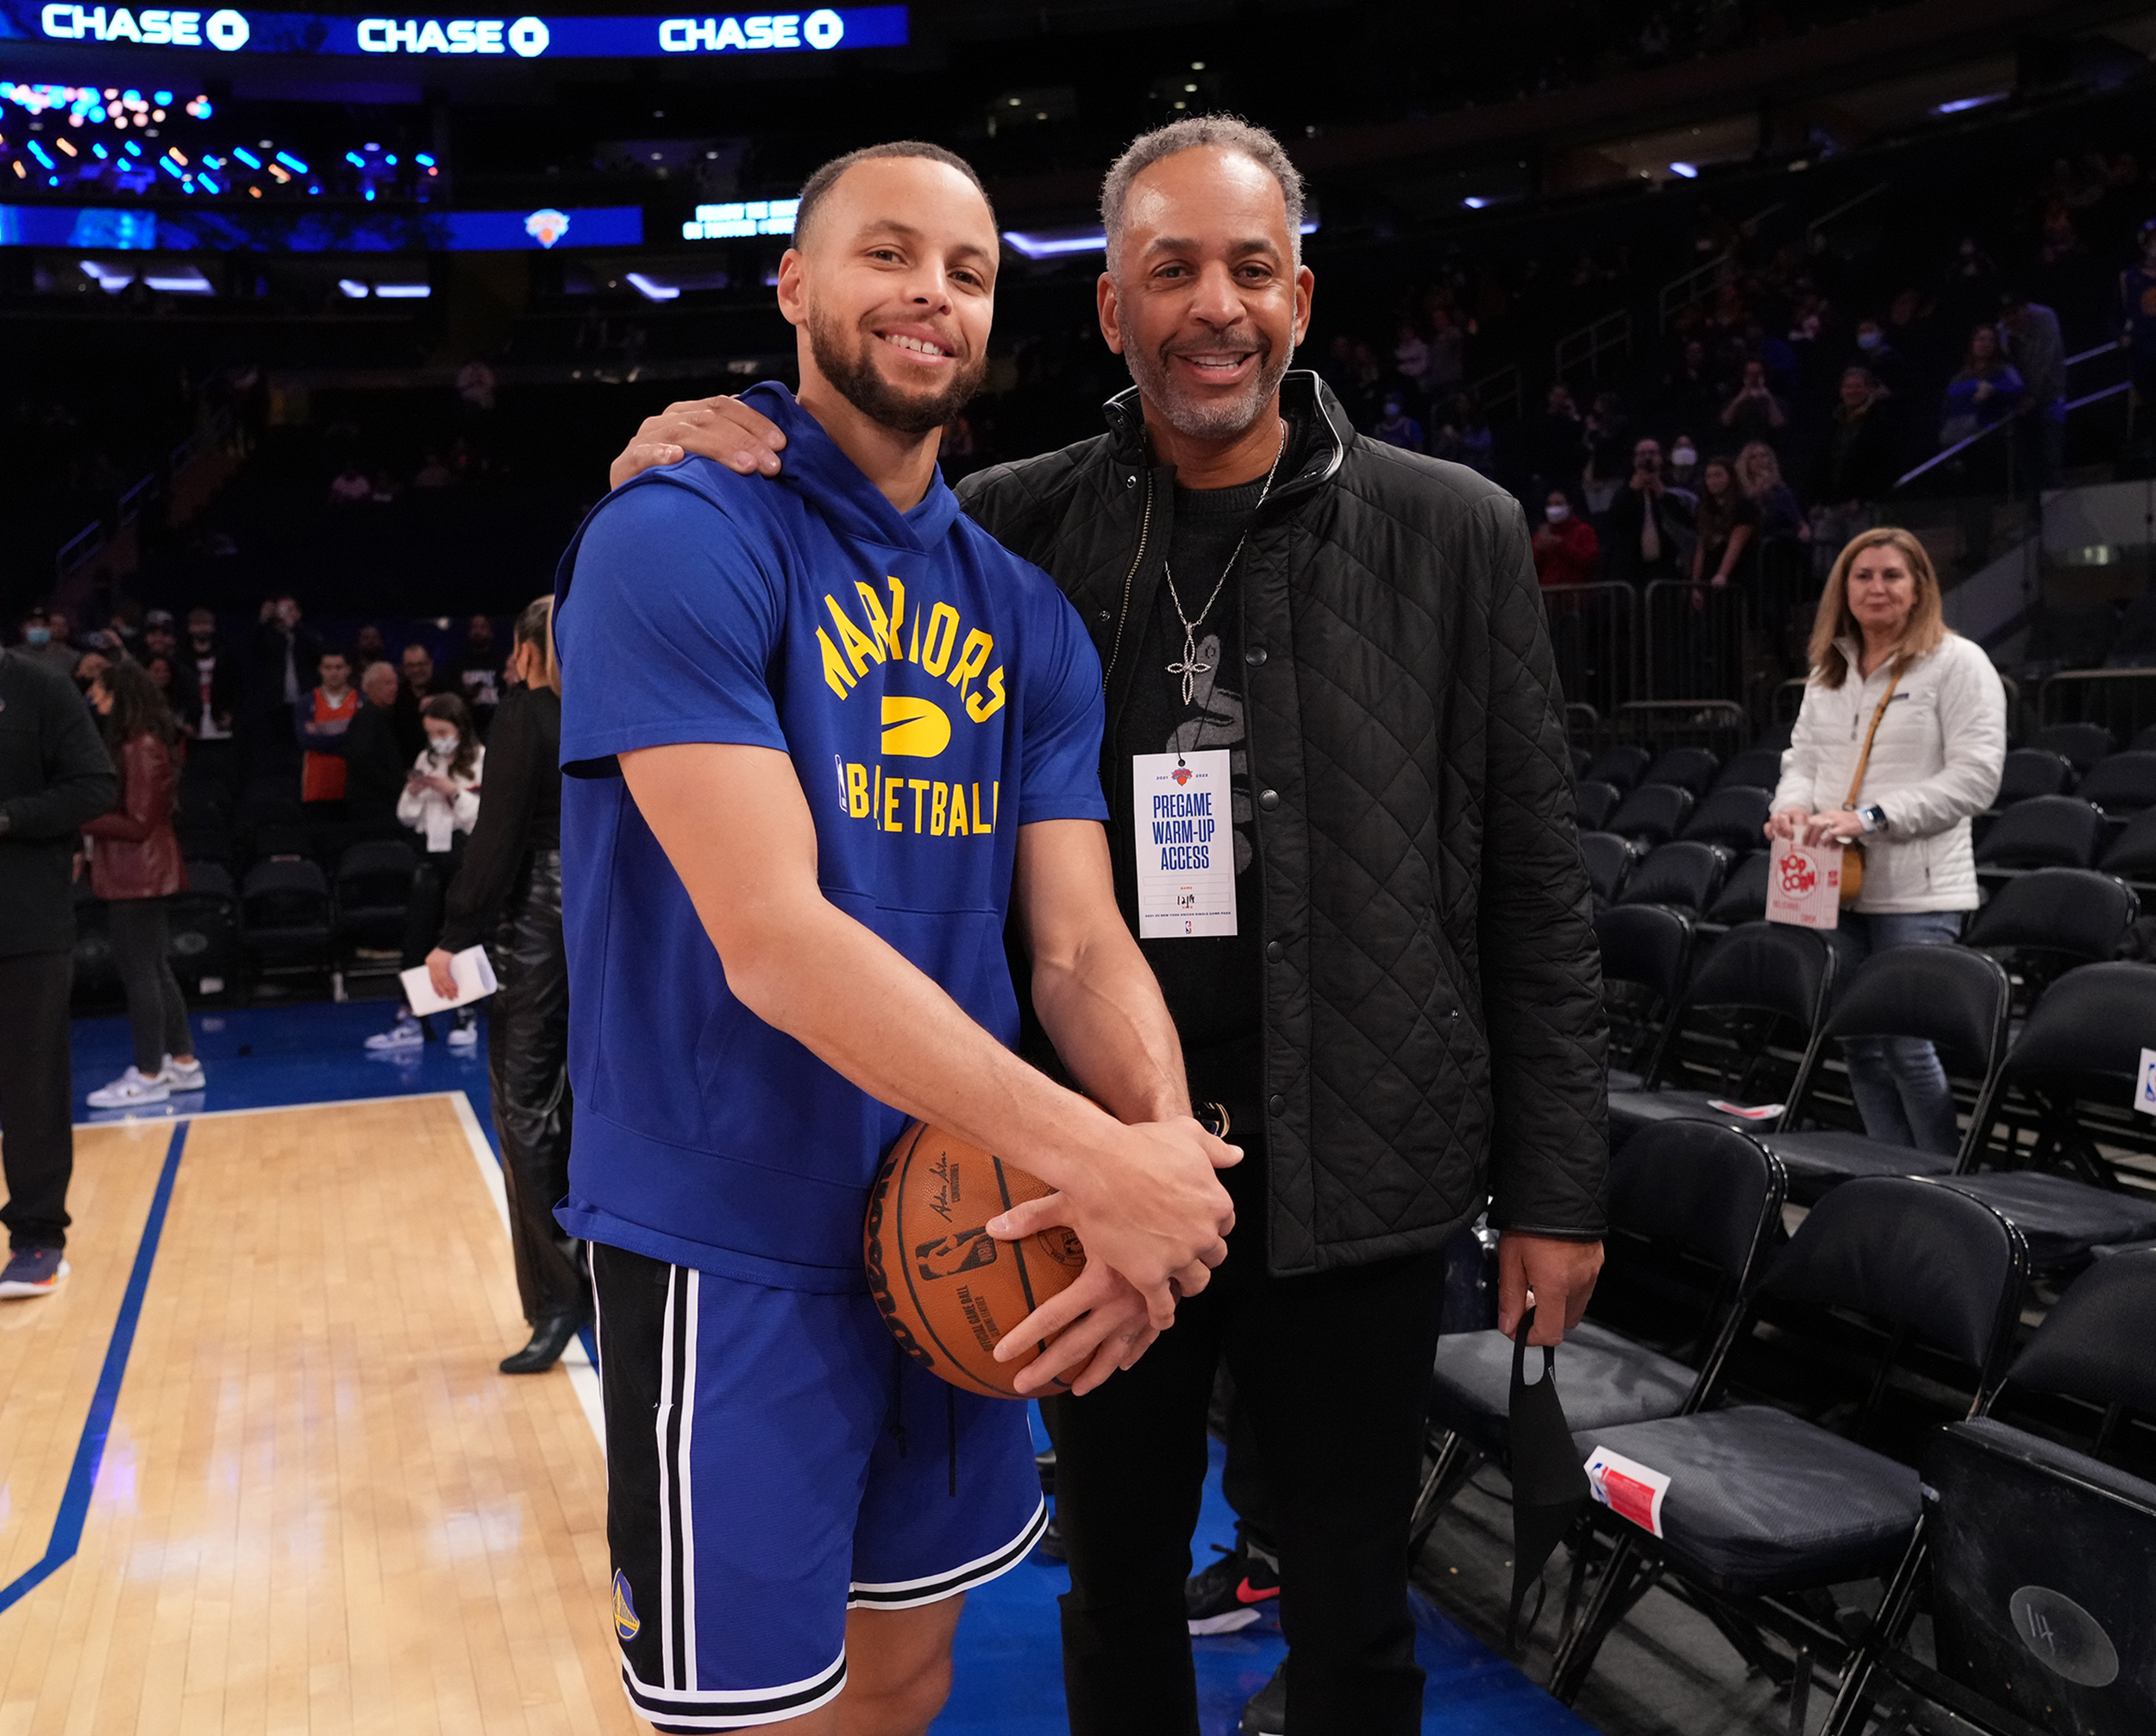 Stephen Curry's Winning Play: Gratitude to God and Family